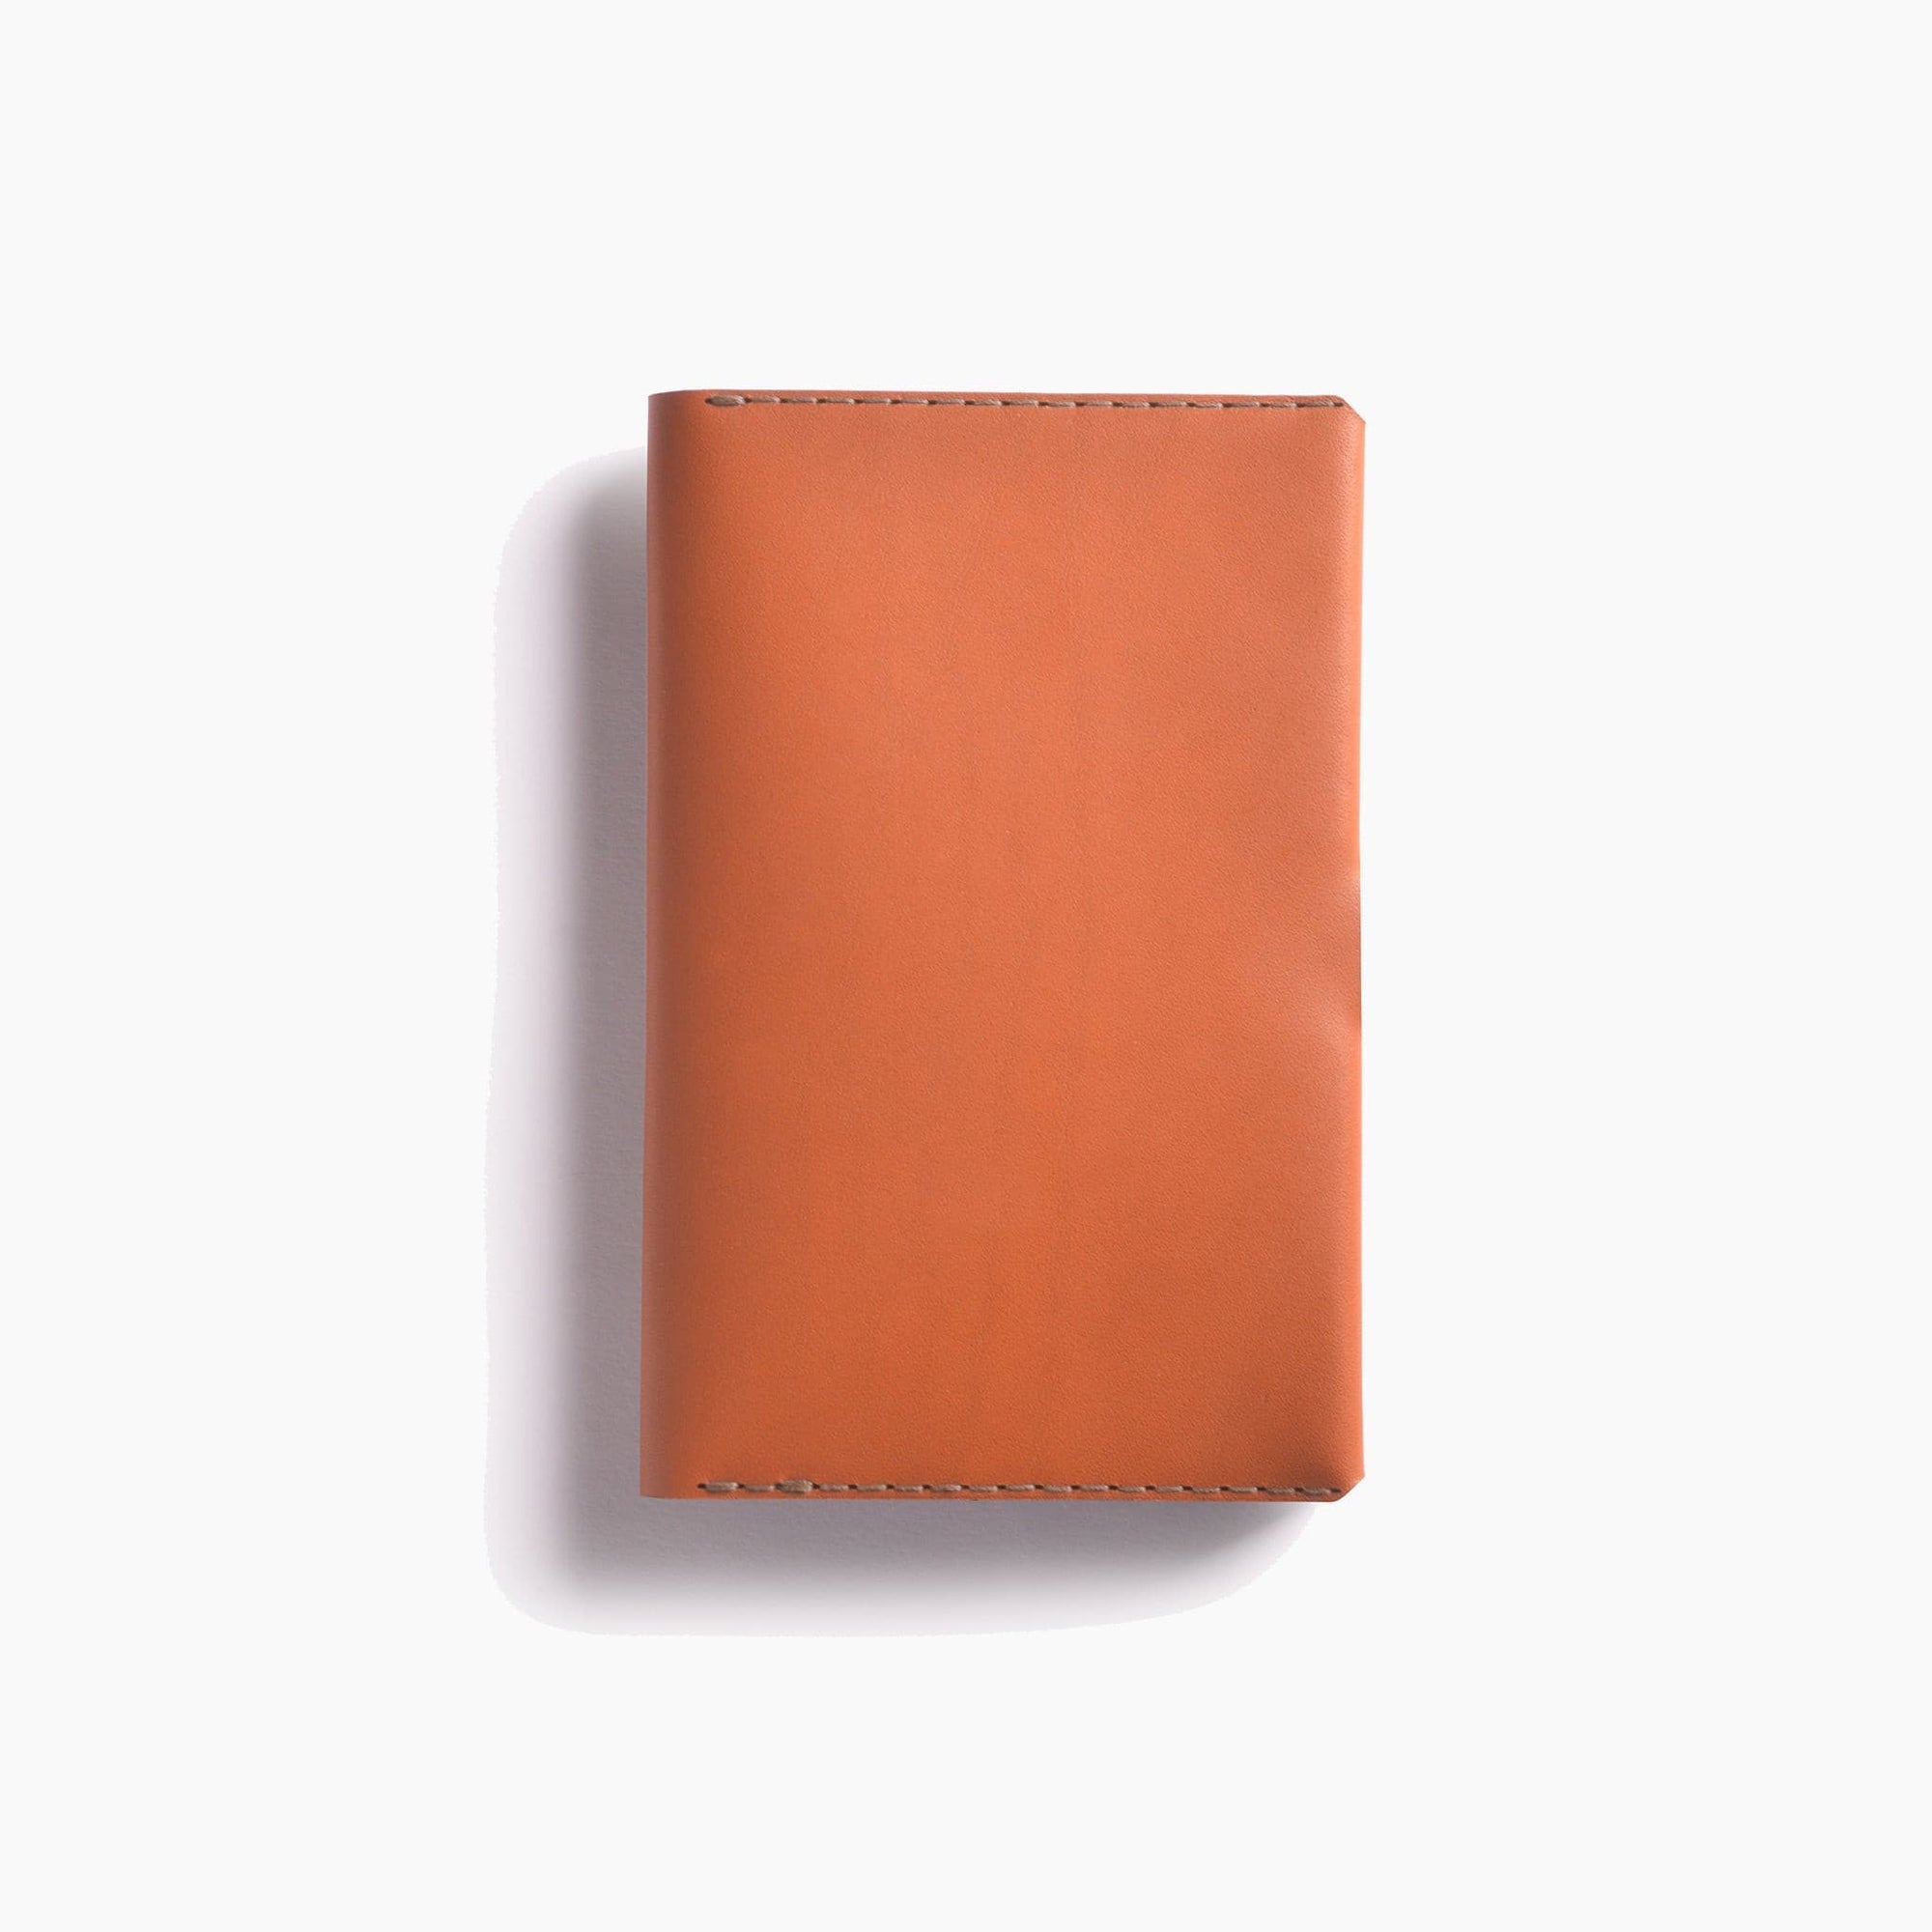 Wingback Wingston Travel Wallet - Storming Gravity